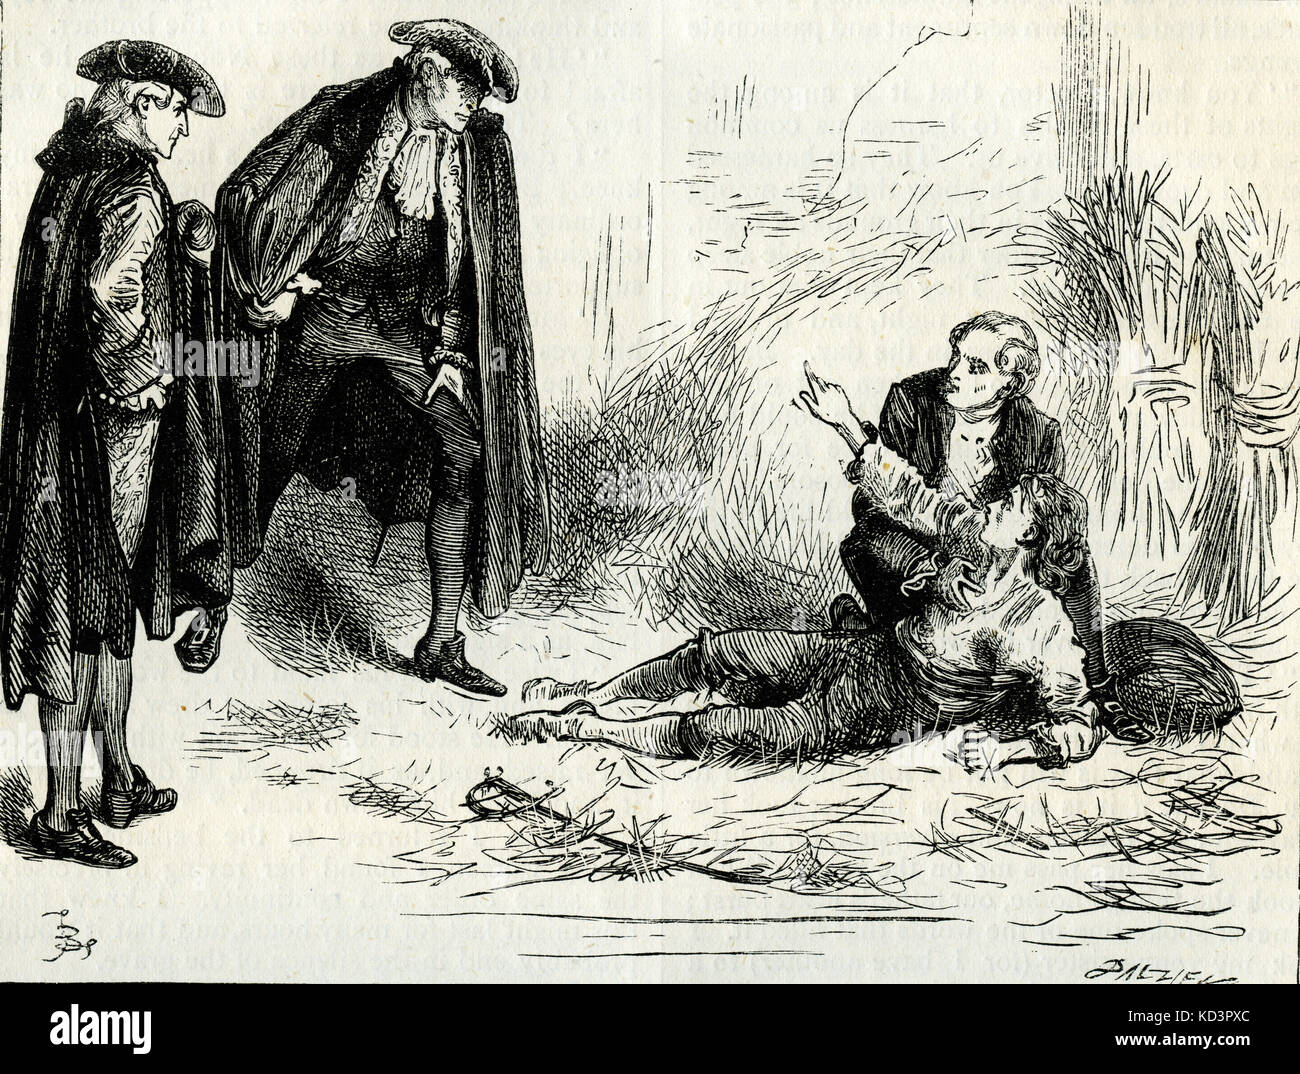 A Tale of Two Cities. A peasant man stabbed by the young Marquis St Evrémonde and his brother, curses them and their family line, book 3 chapter 10. Caption reads: 'Twice he put his hand to the wound in his breast, and with his forefinger drew a cross in the air.' Novel by Charles Dickens, English novelist, 7 February 1812 - 9 June 1870. Illustration by Frederick (Fred) Barnard. London. Chapman and Hall. Stock Photo